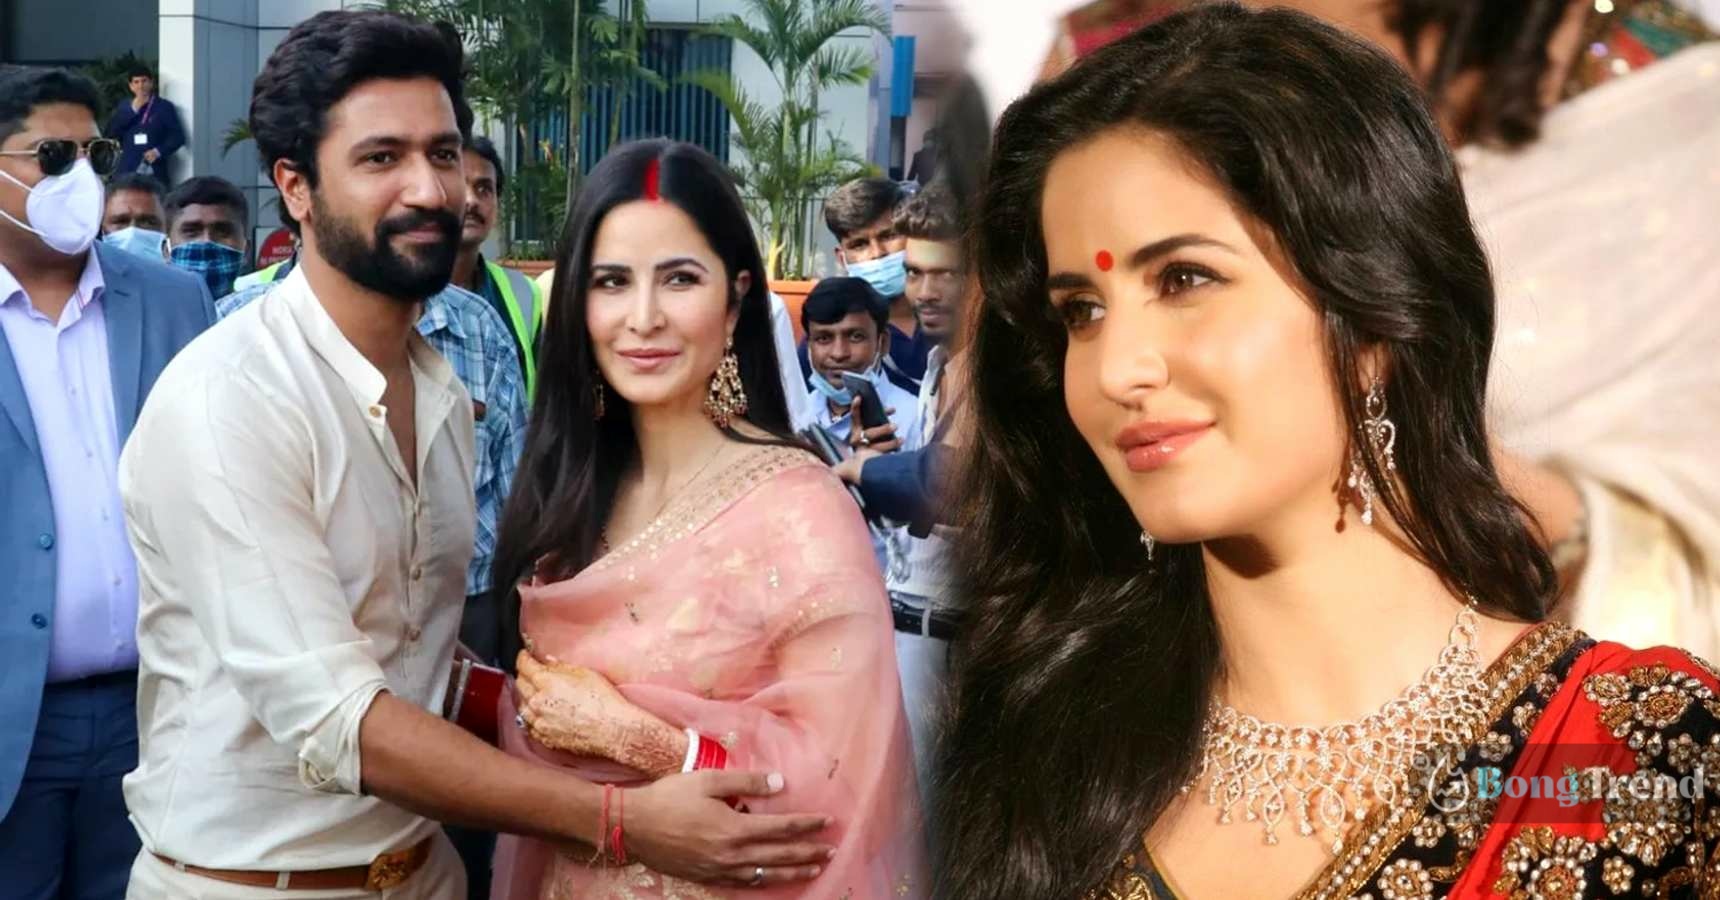 Katrina Kaif will announce pregnency later this year predicts astrologer